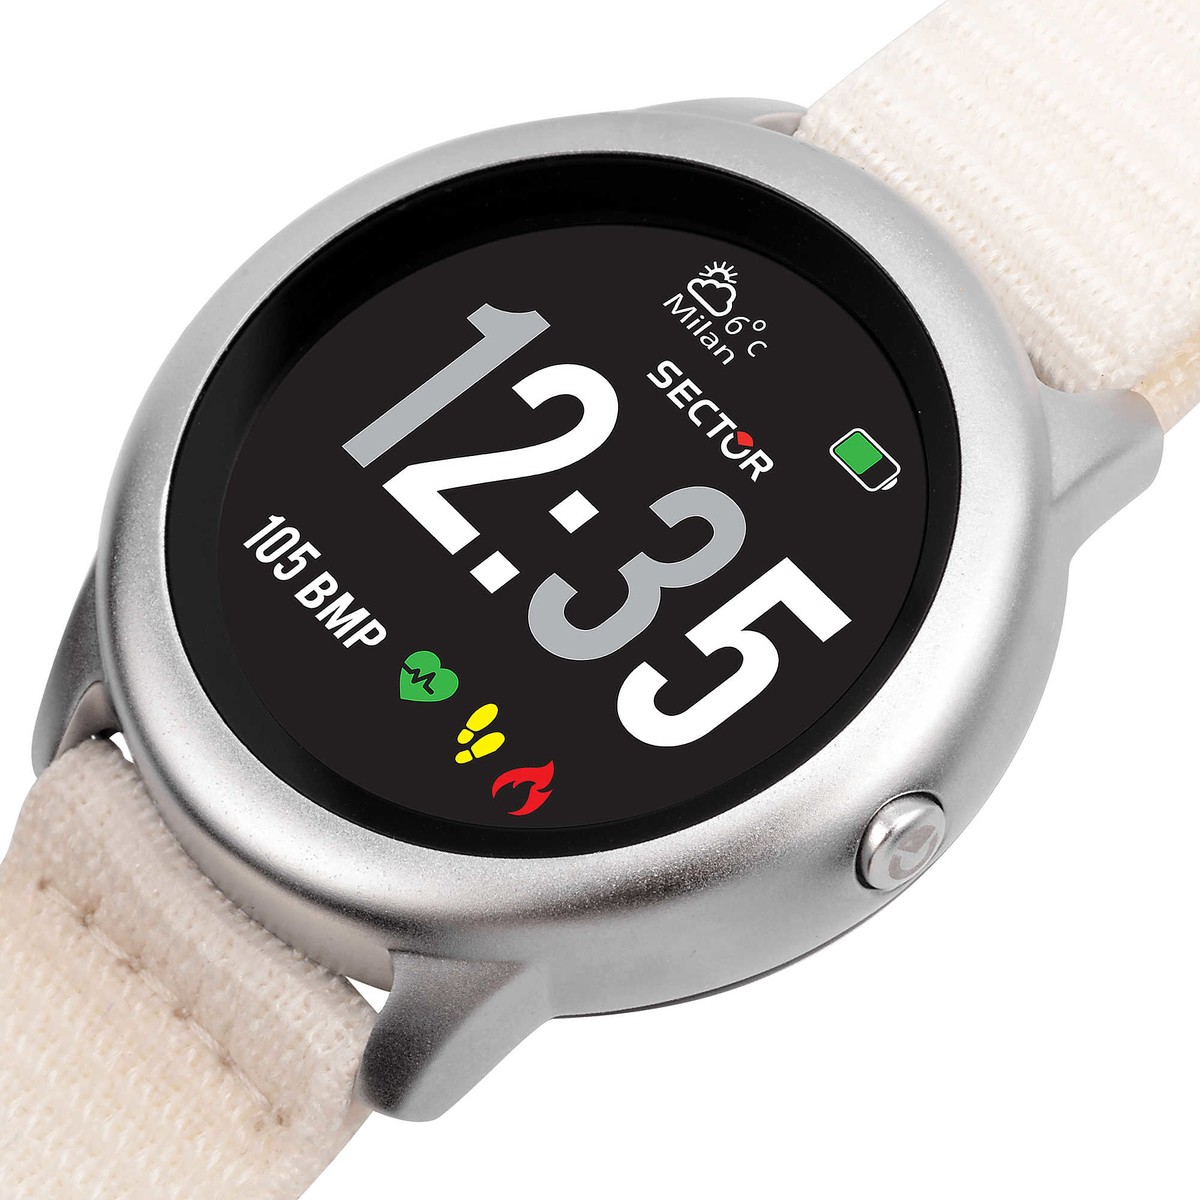 Orologio Smartwatch Sector S-01 - R3251545502